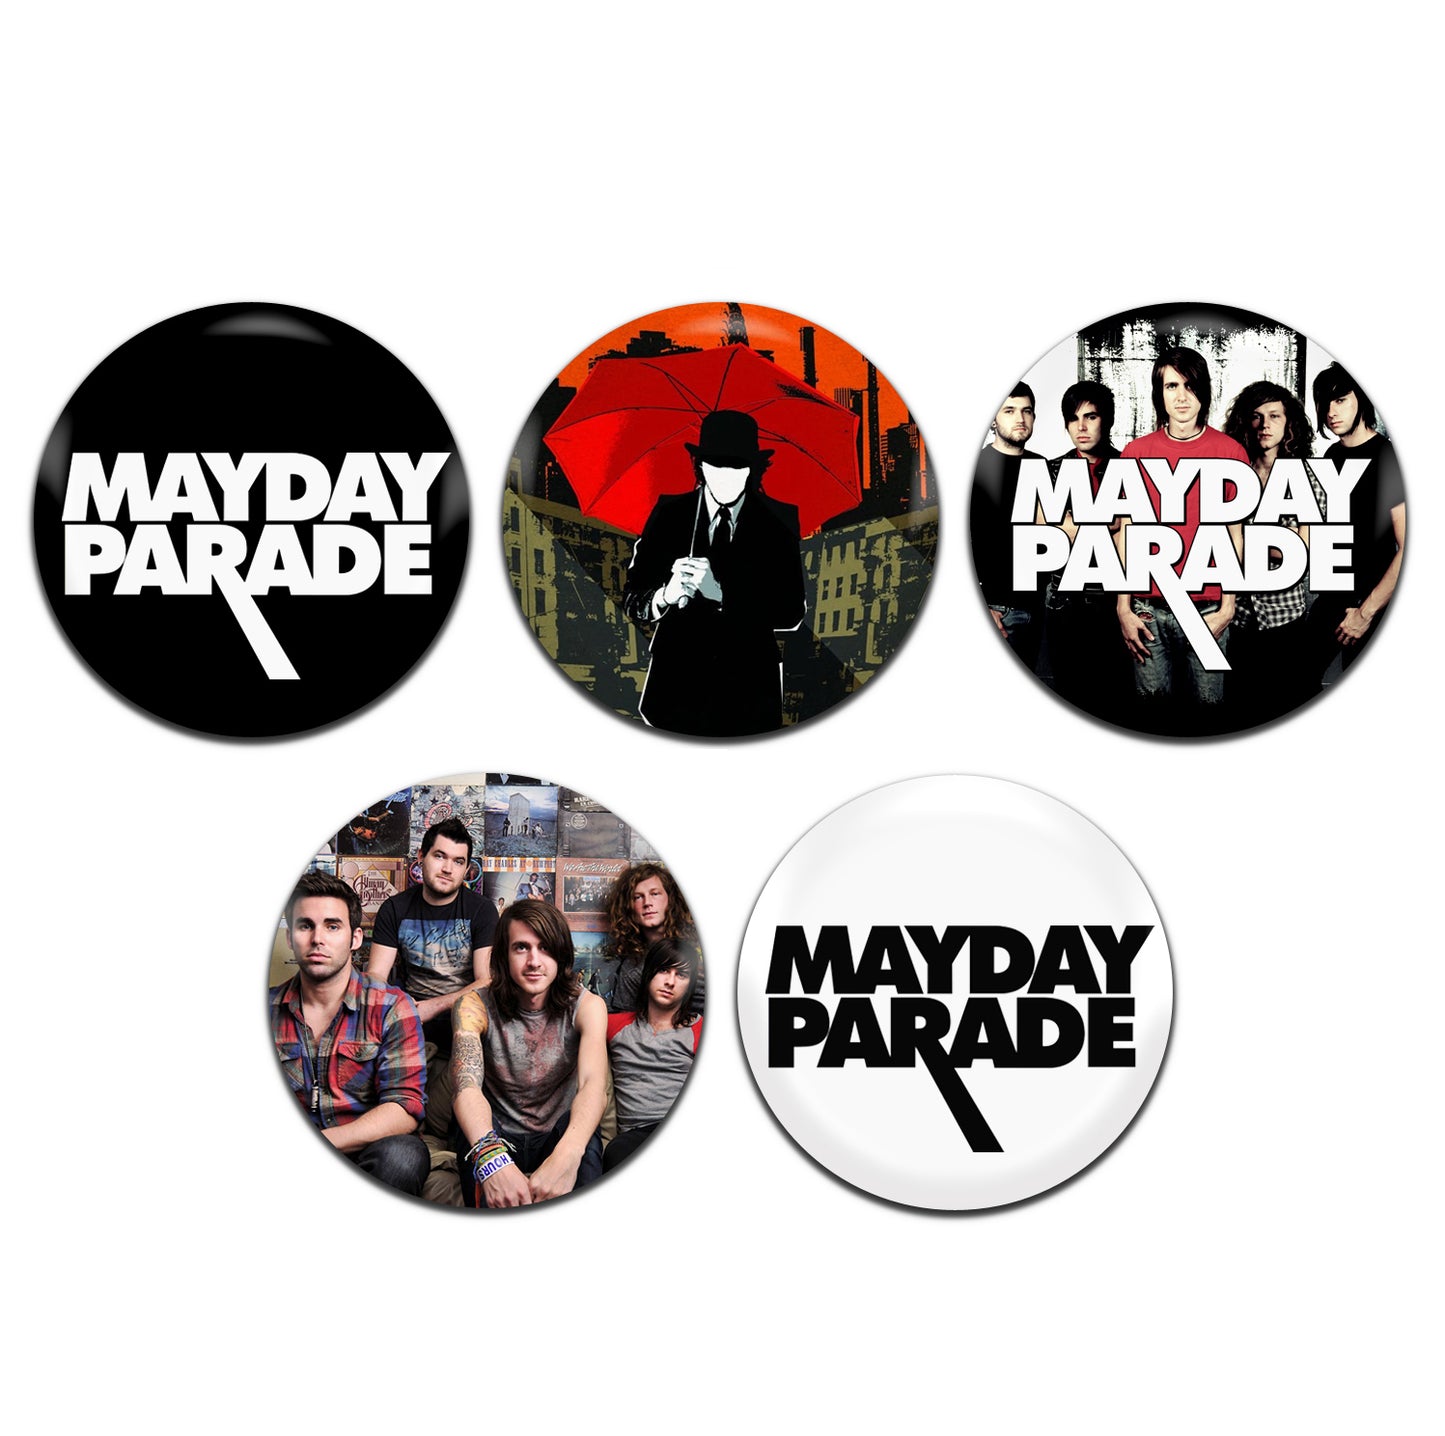 Mayday Parade Pop Rock Emo Alternative 00's 25mm / 1 Inch D-Pin Button Badges (5x Set)